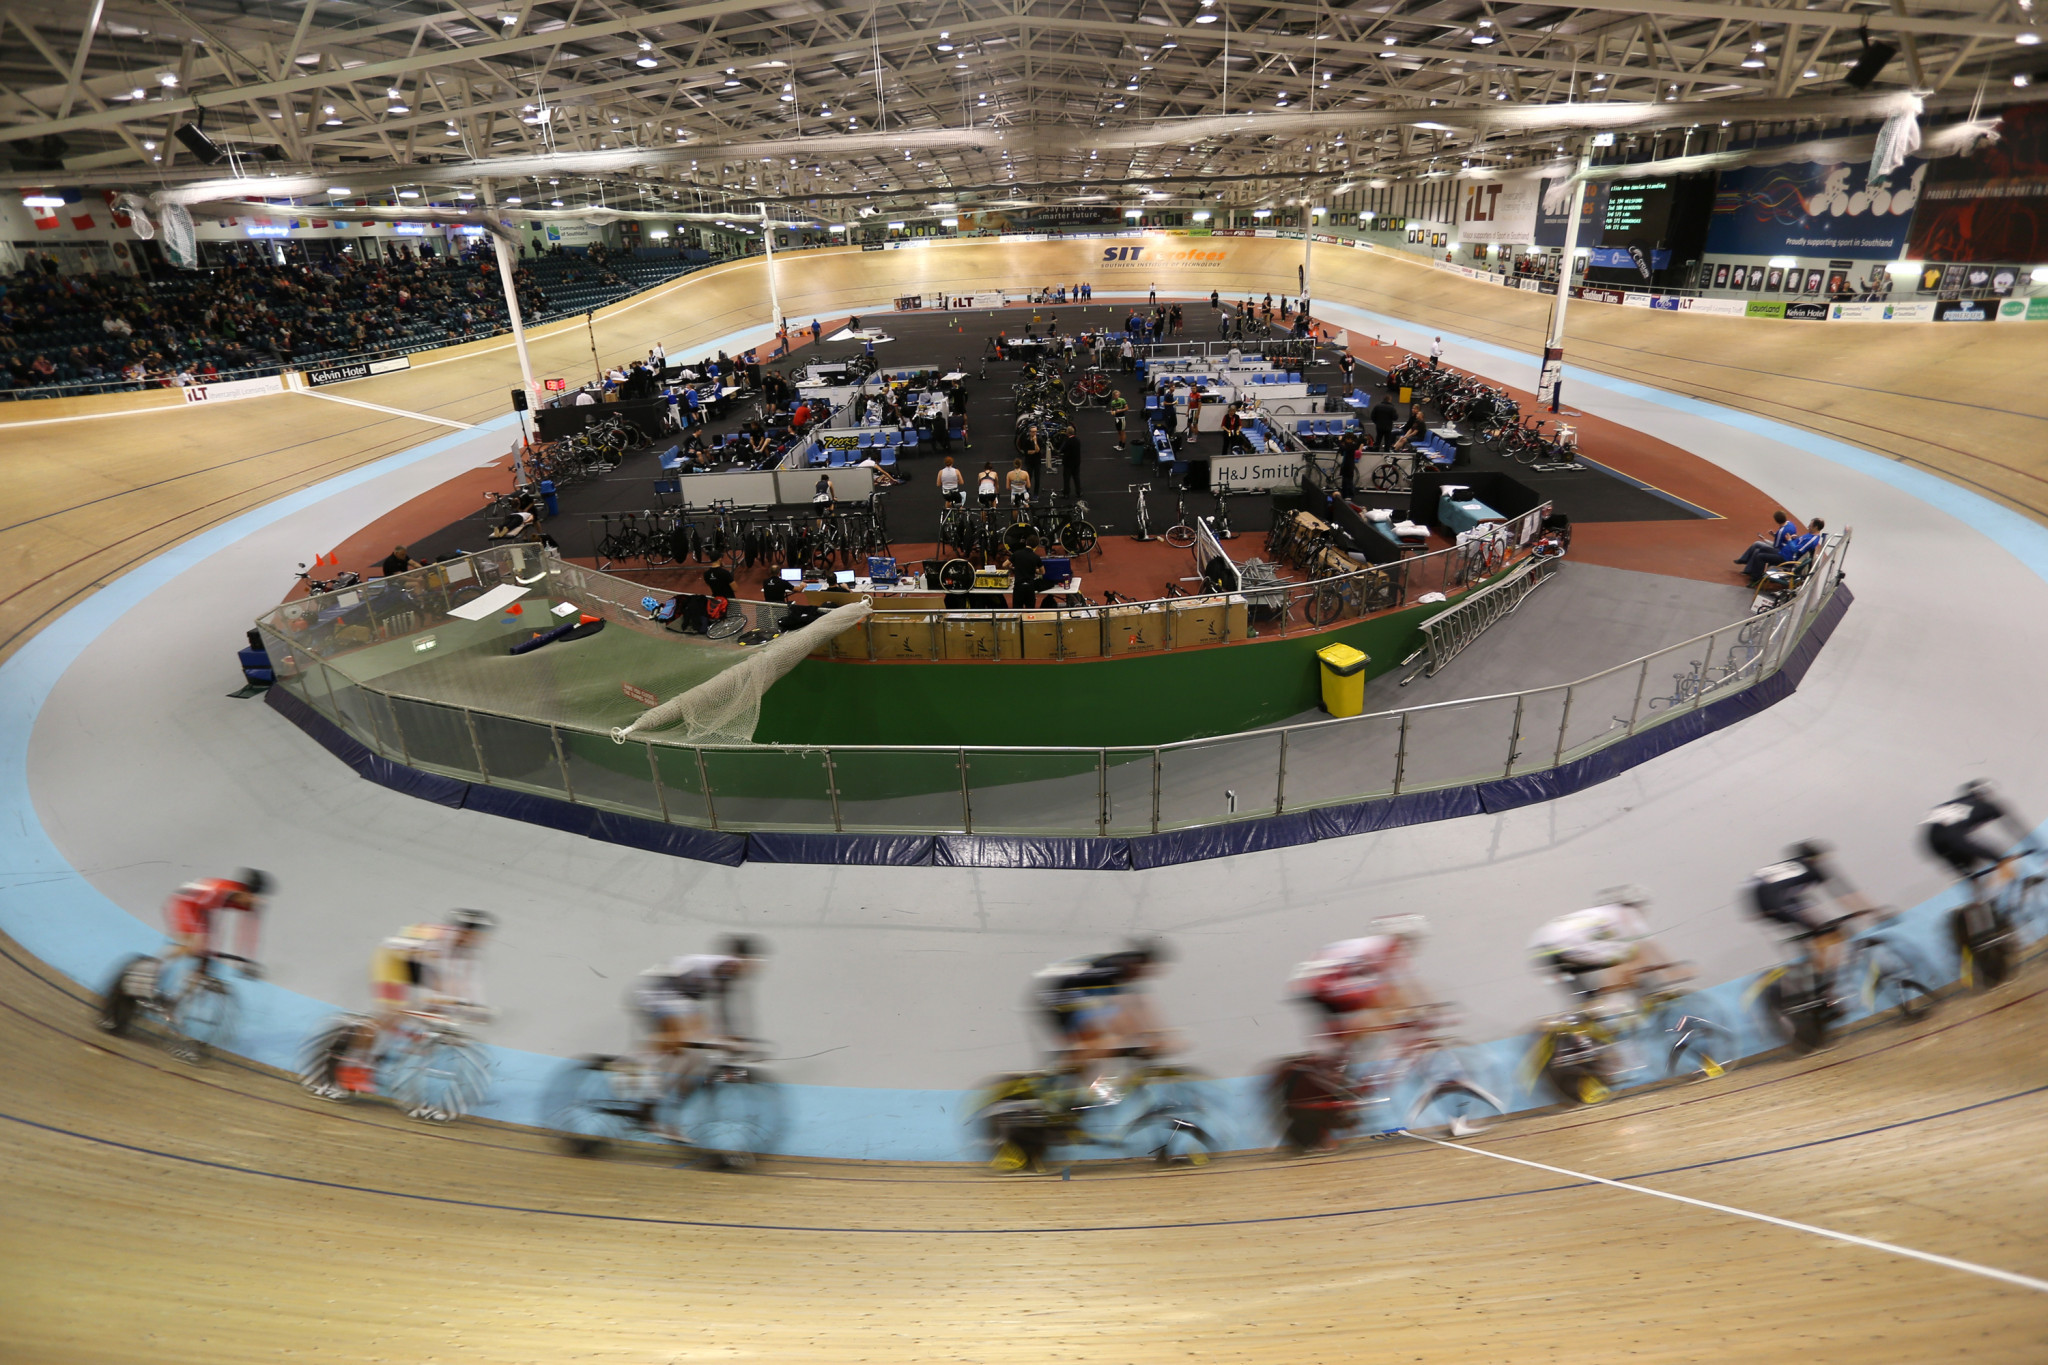 The world's southernmost velodrome will host the 2020 Oceania Track Cycling Championships ©Getty Images